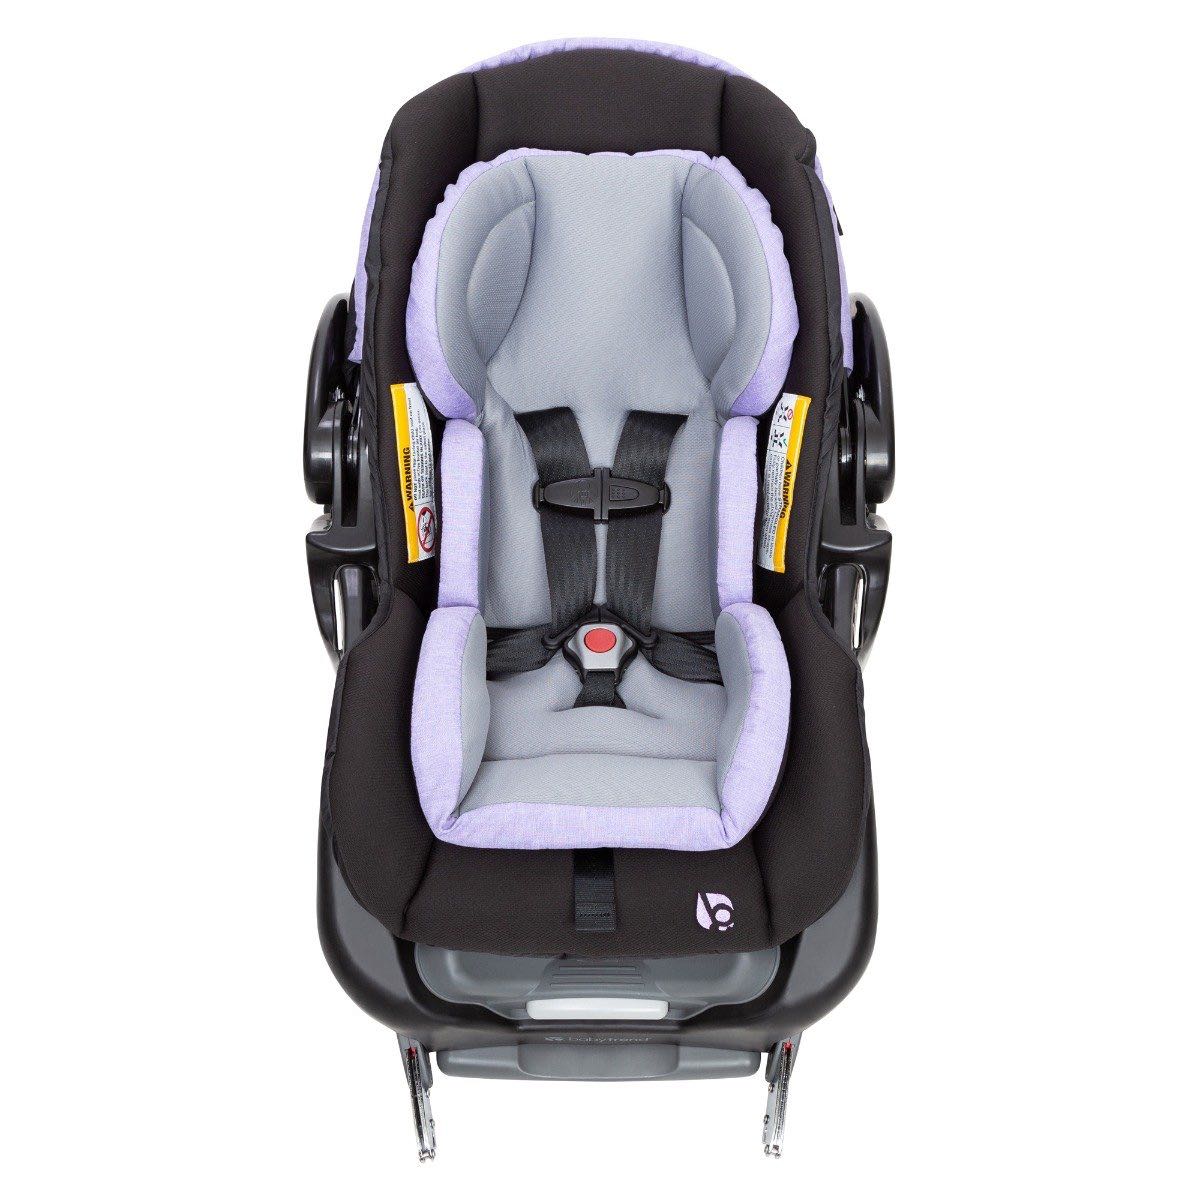  Baby Trend Secure-Lift 35 Infant Car Seat, Dash Black : Baby